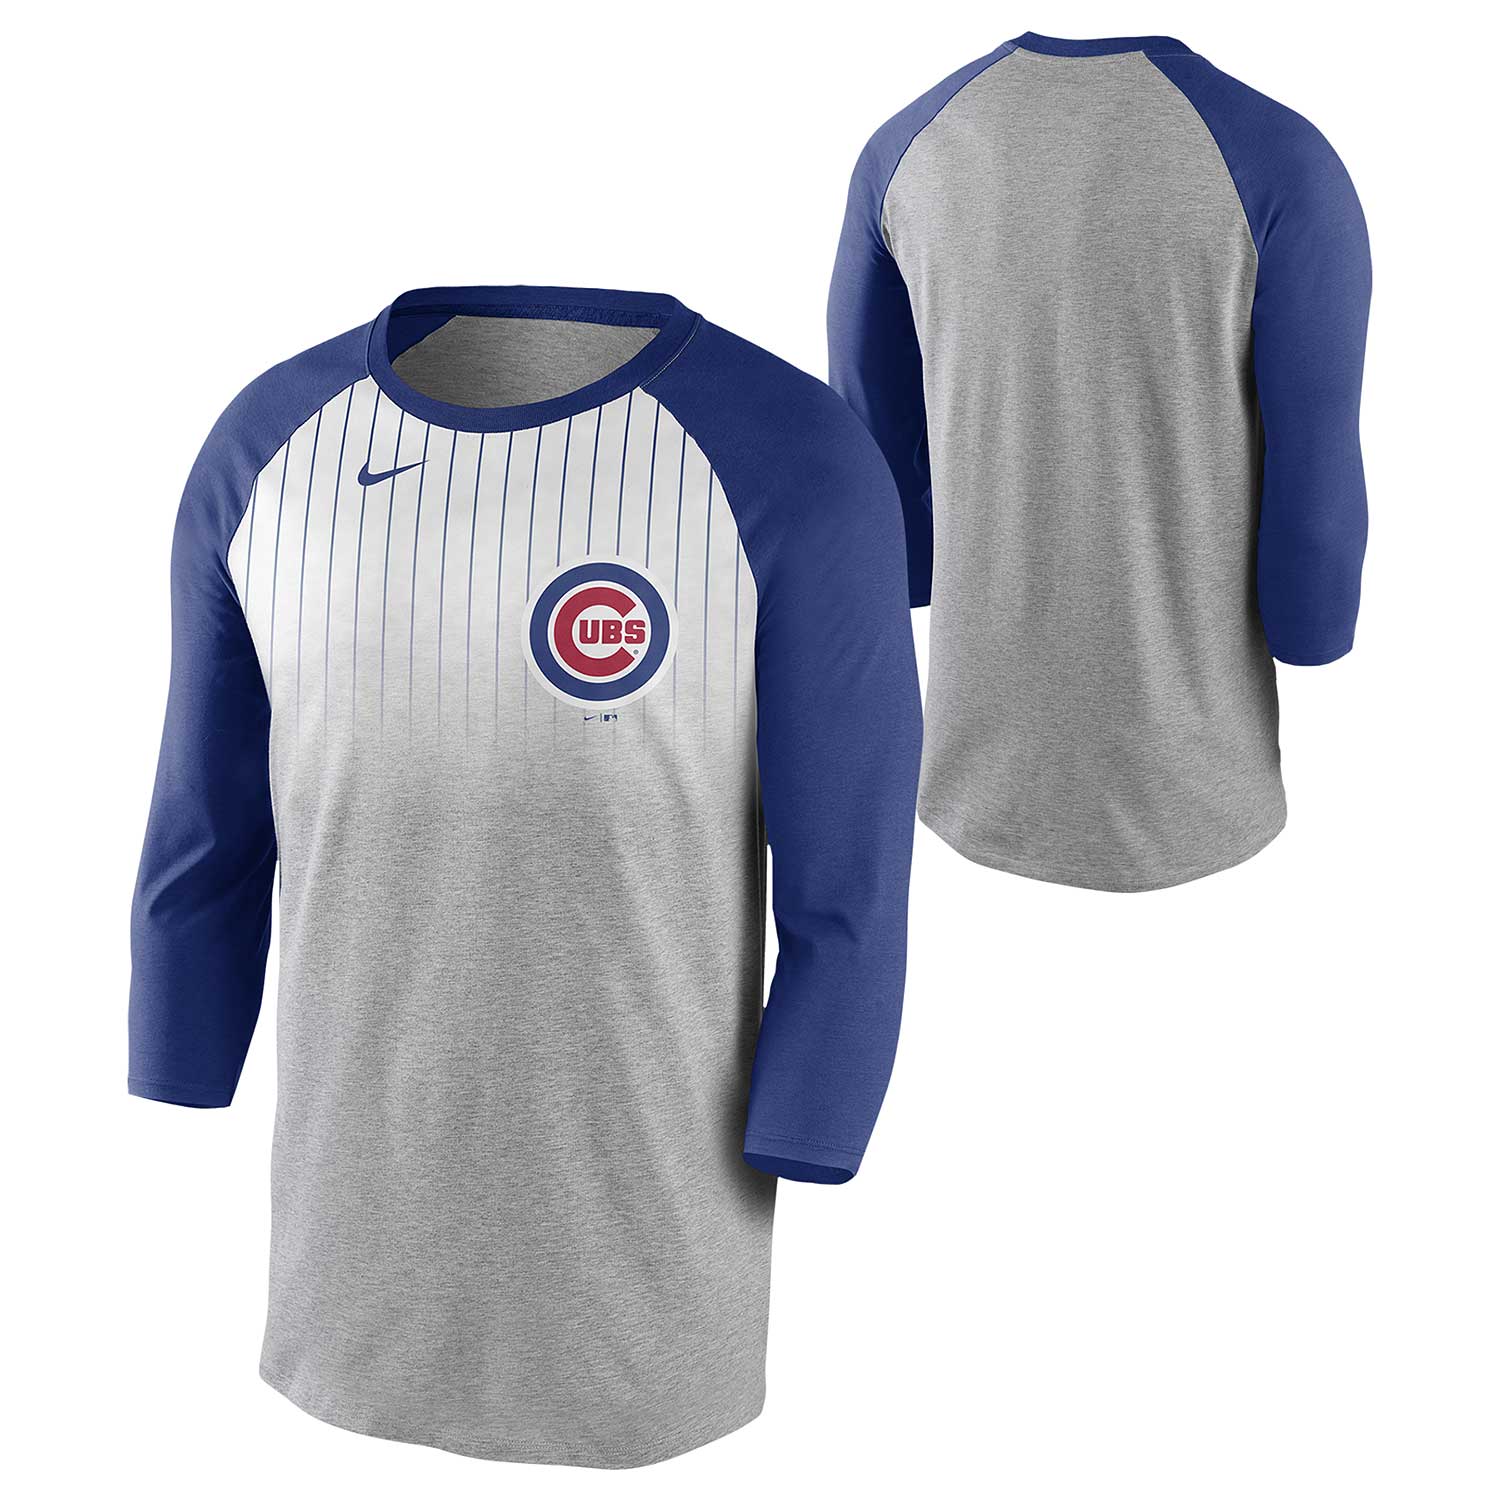 Nike Over Arch (MLB Chicago Cubs) Men's Long-Sleeve T-Shirt